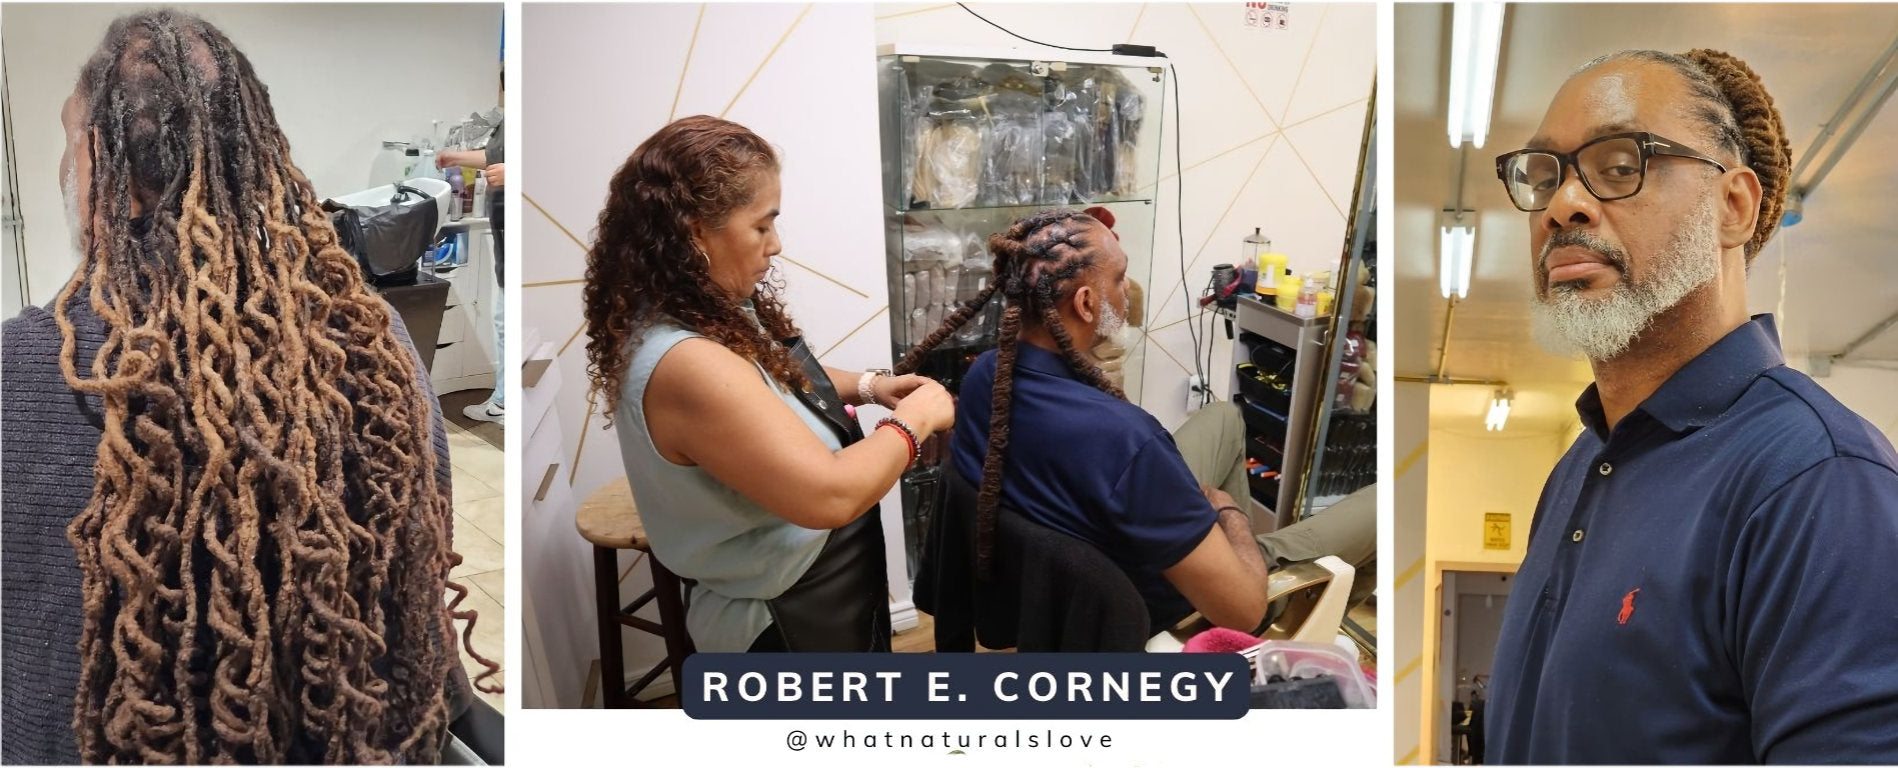 Robert E. Cornegy's Locs Journey: A Story of Commitment, Pride, Determination and growing 4 feet long Locs